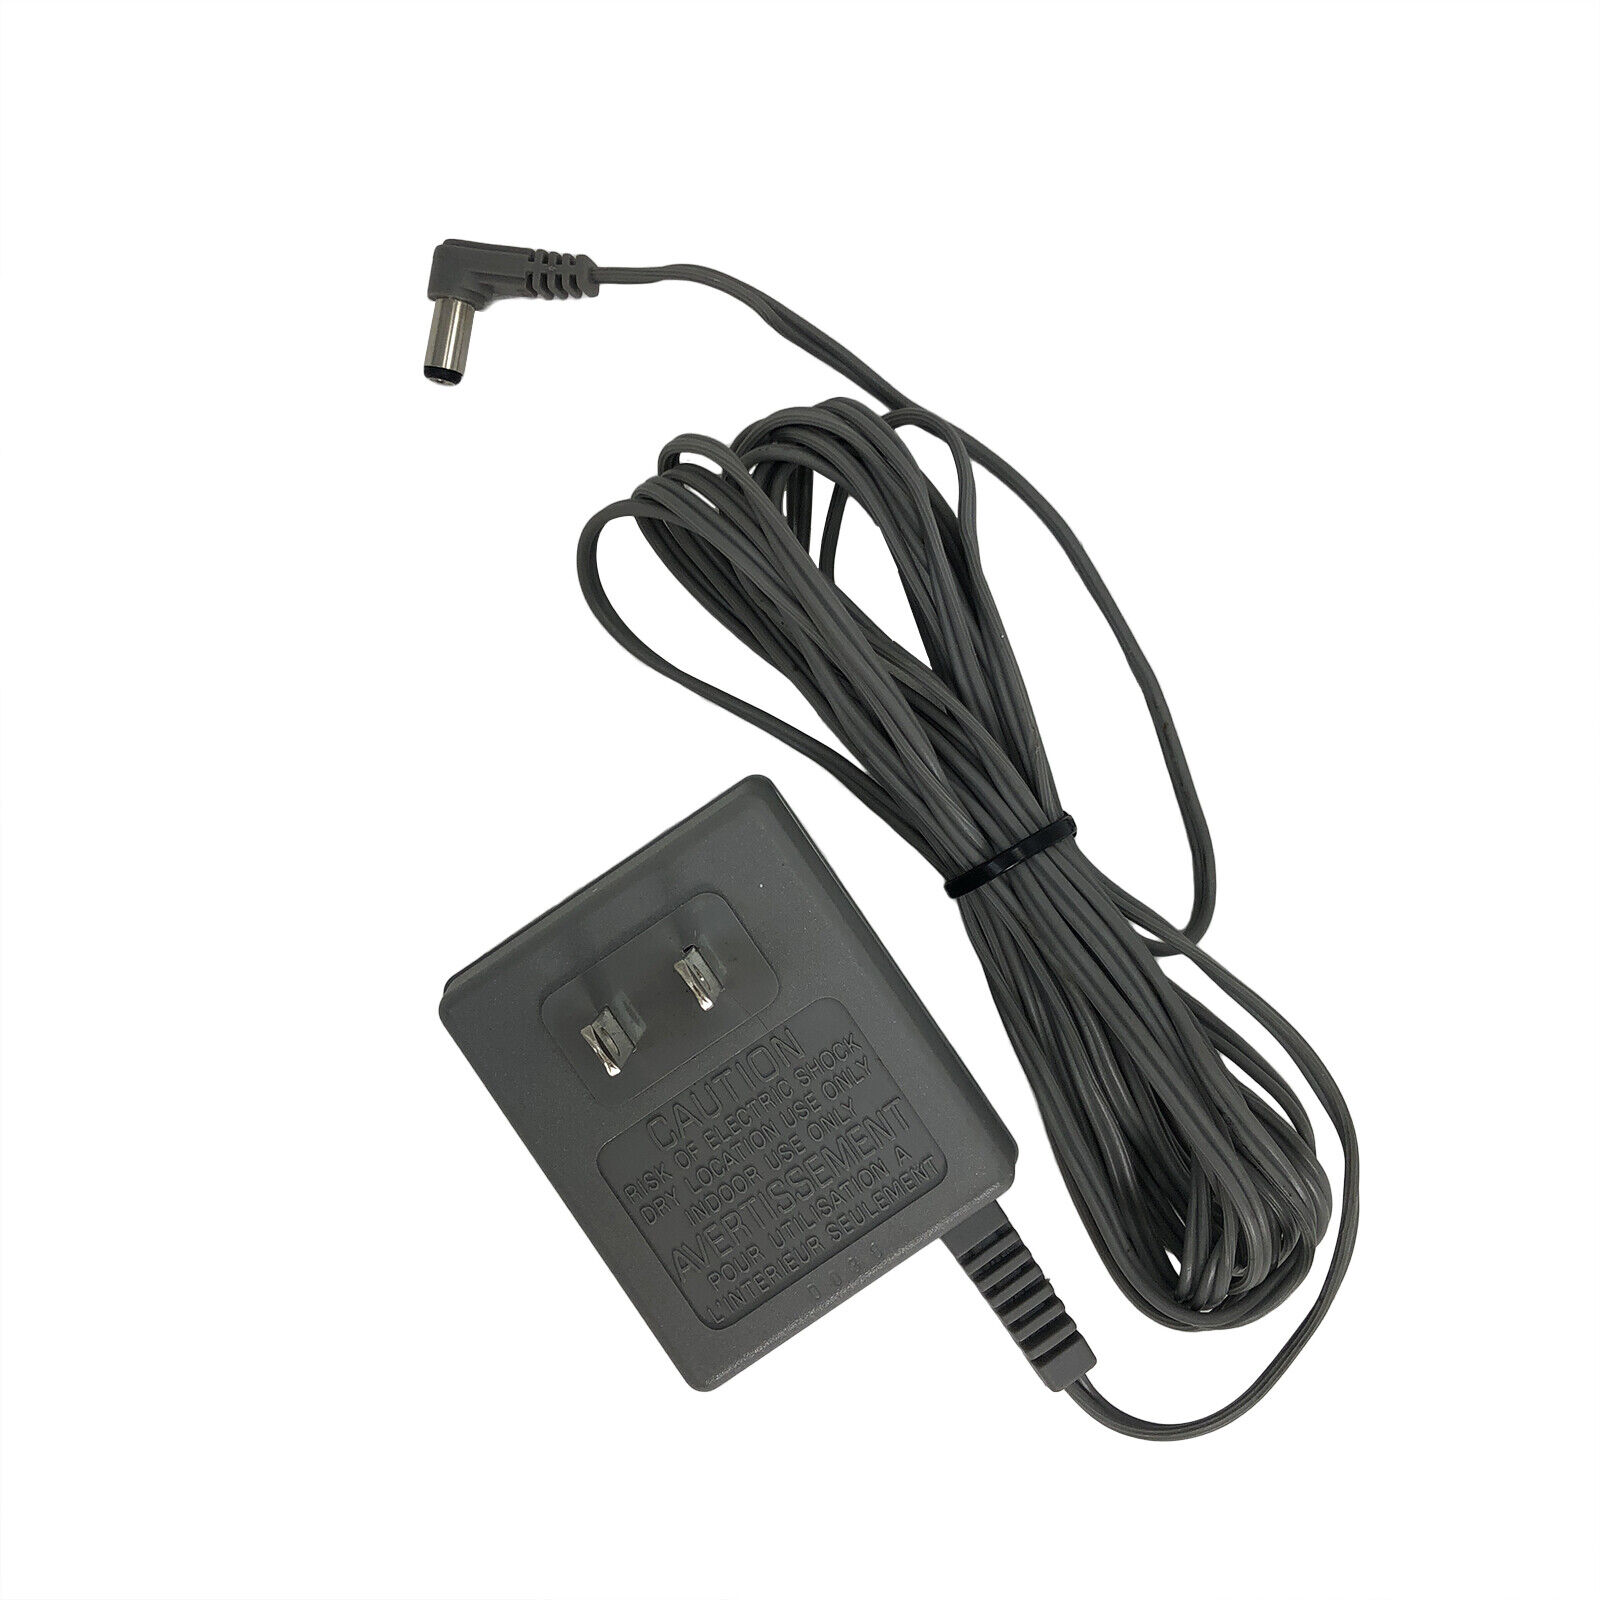 *Brand NEW*Genuine Ault 16.5V 0.25A (250mA) AC Adapter for Nortel Meridian M8000 M9000 Series Phones POWER Sup